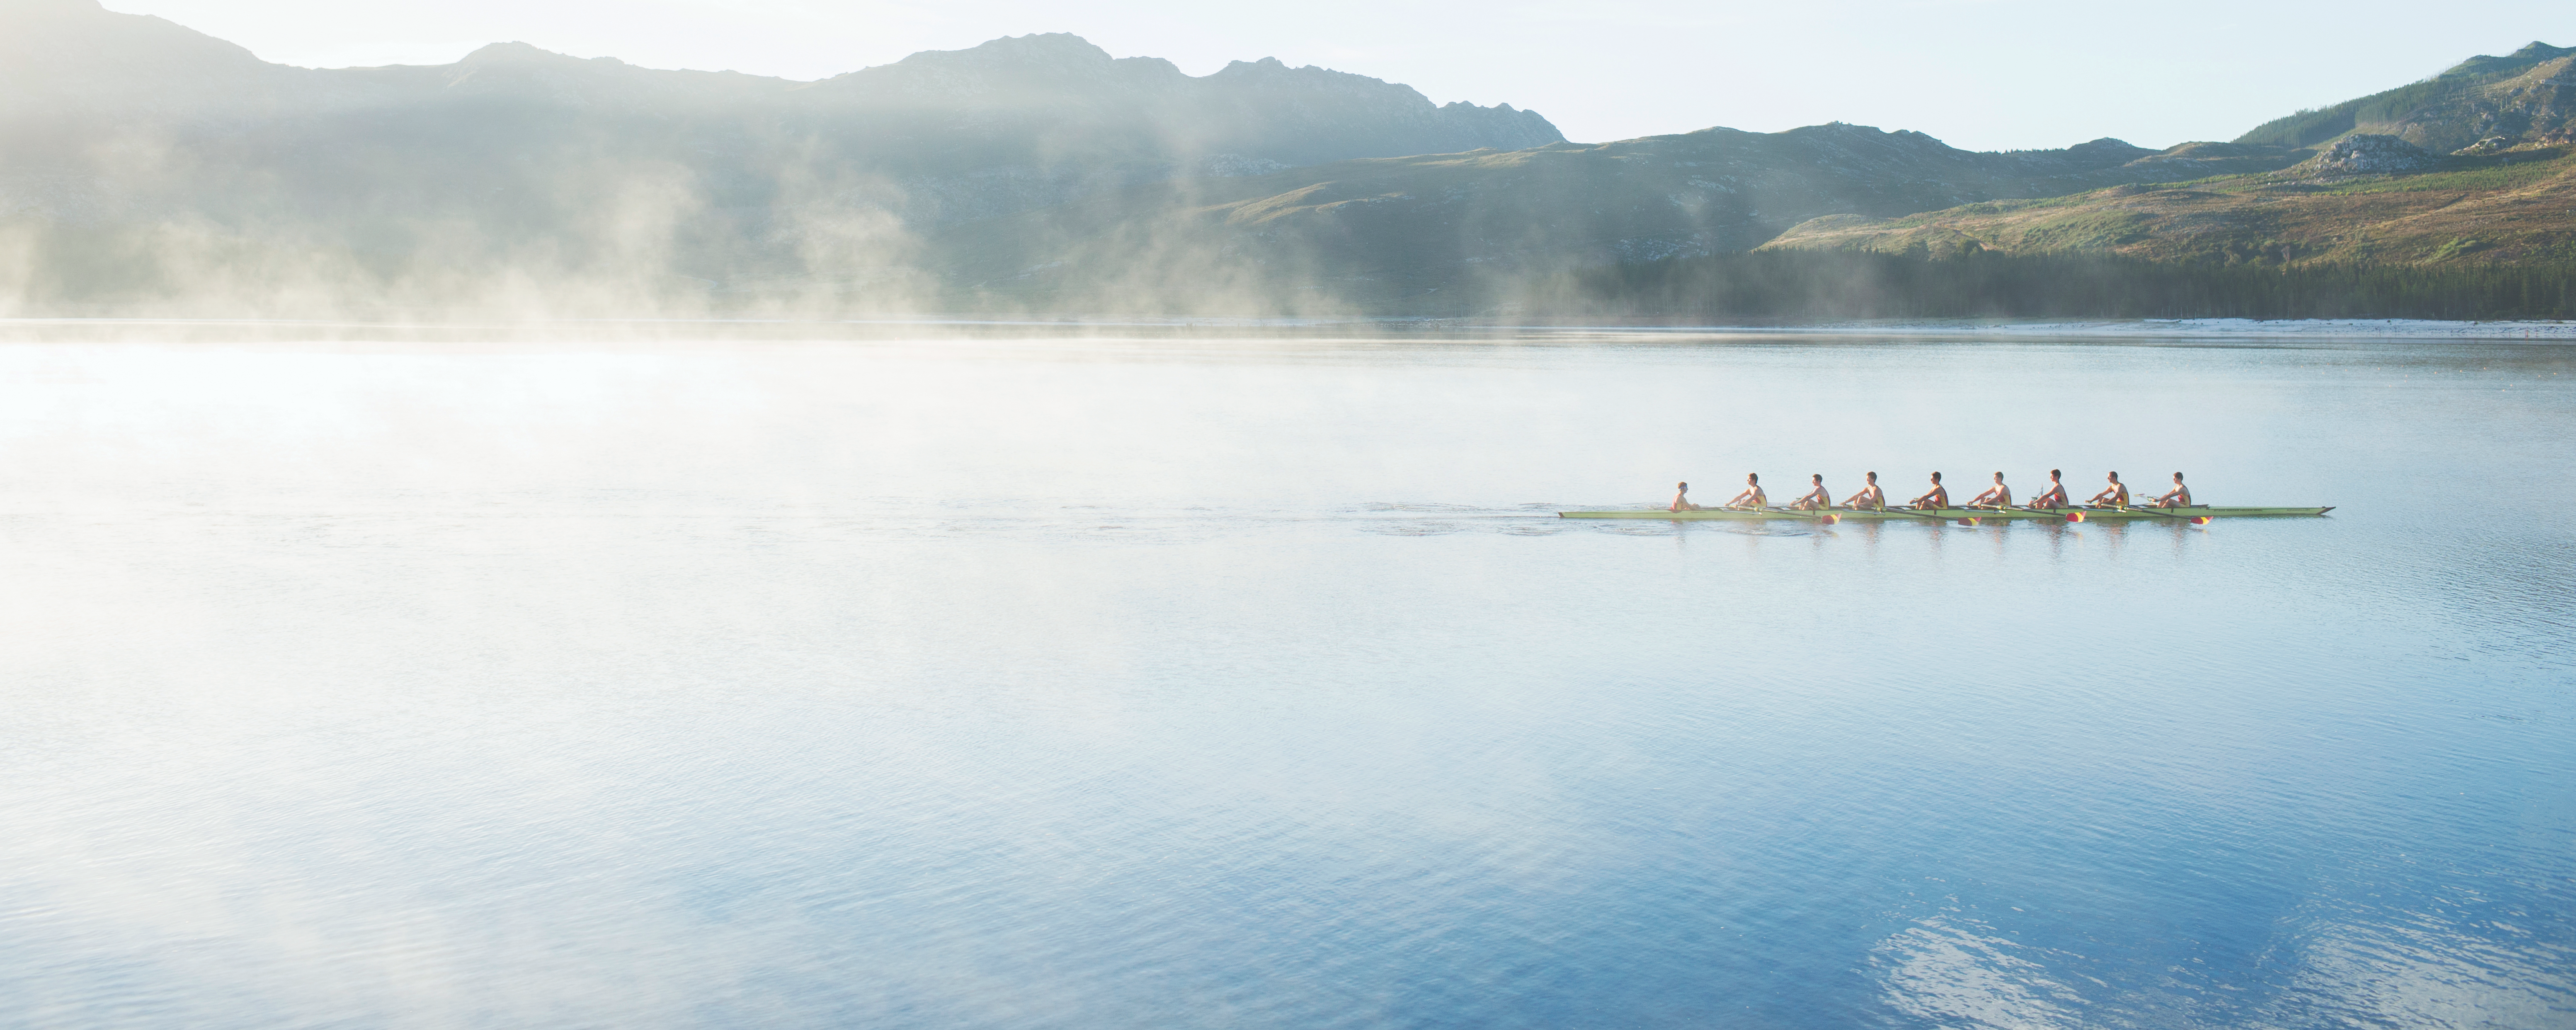 Rowers on a misty lake with mountains in the background